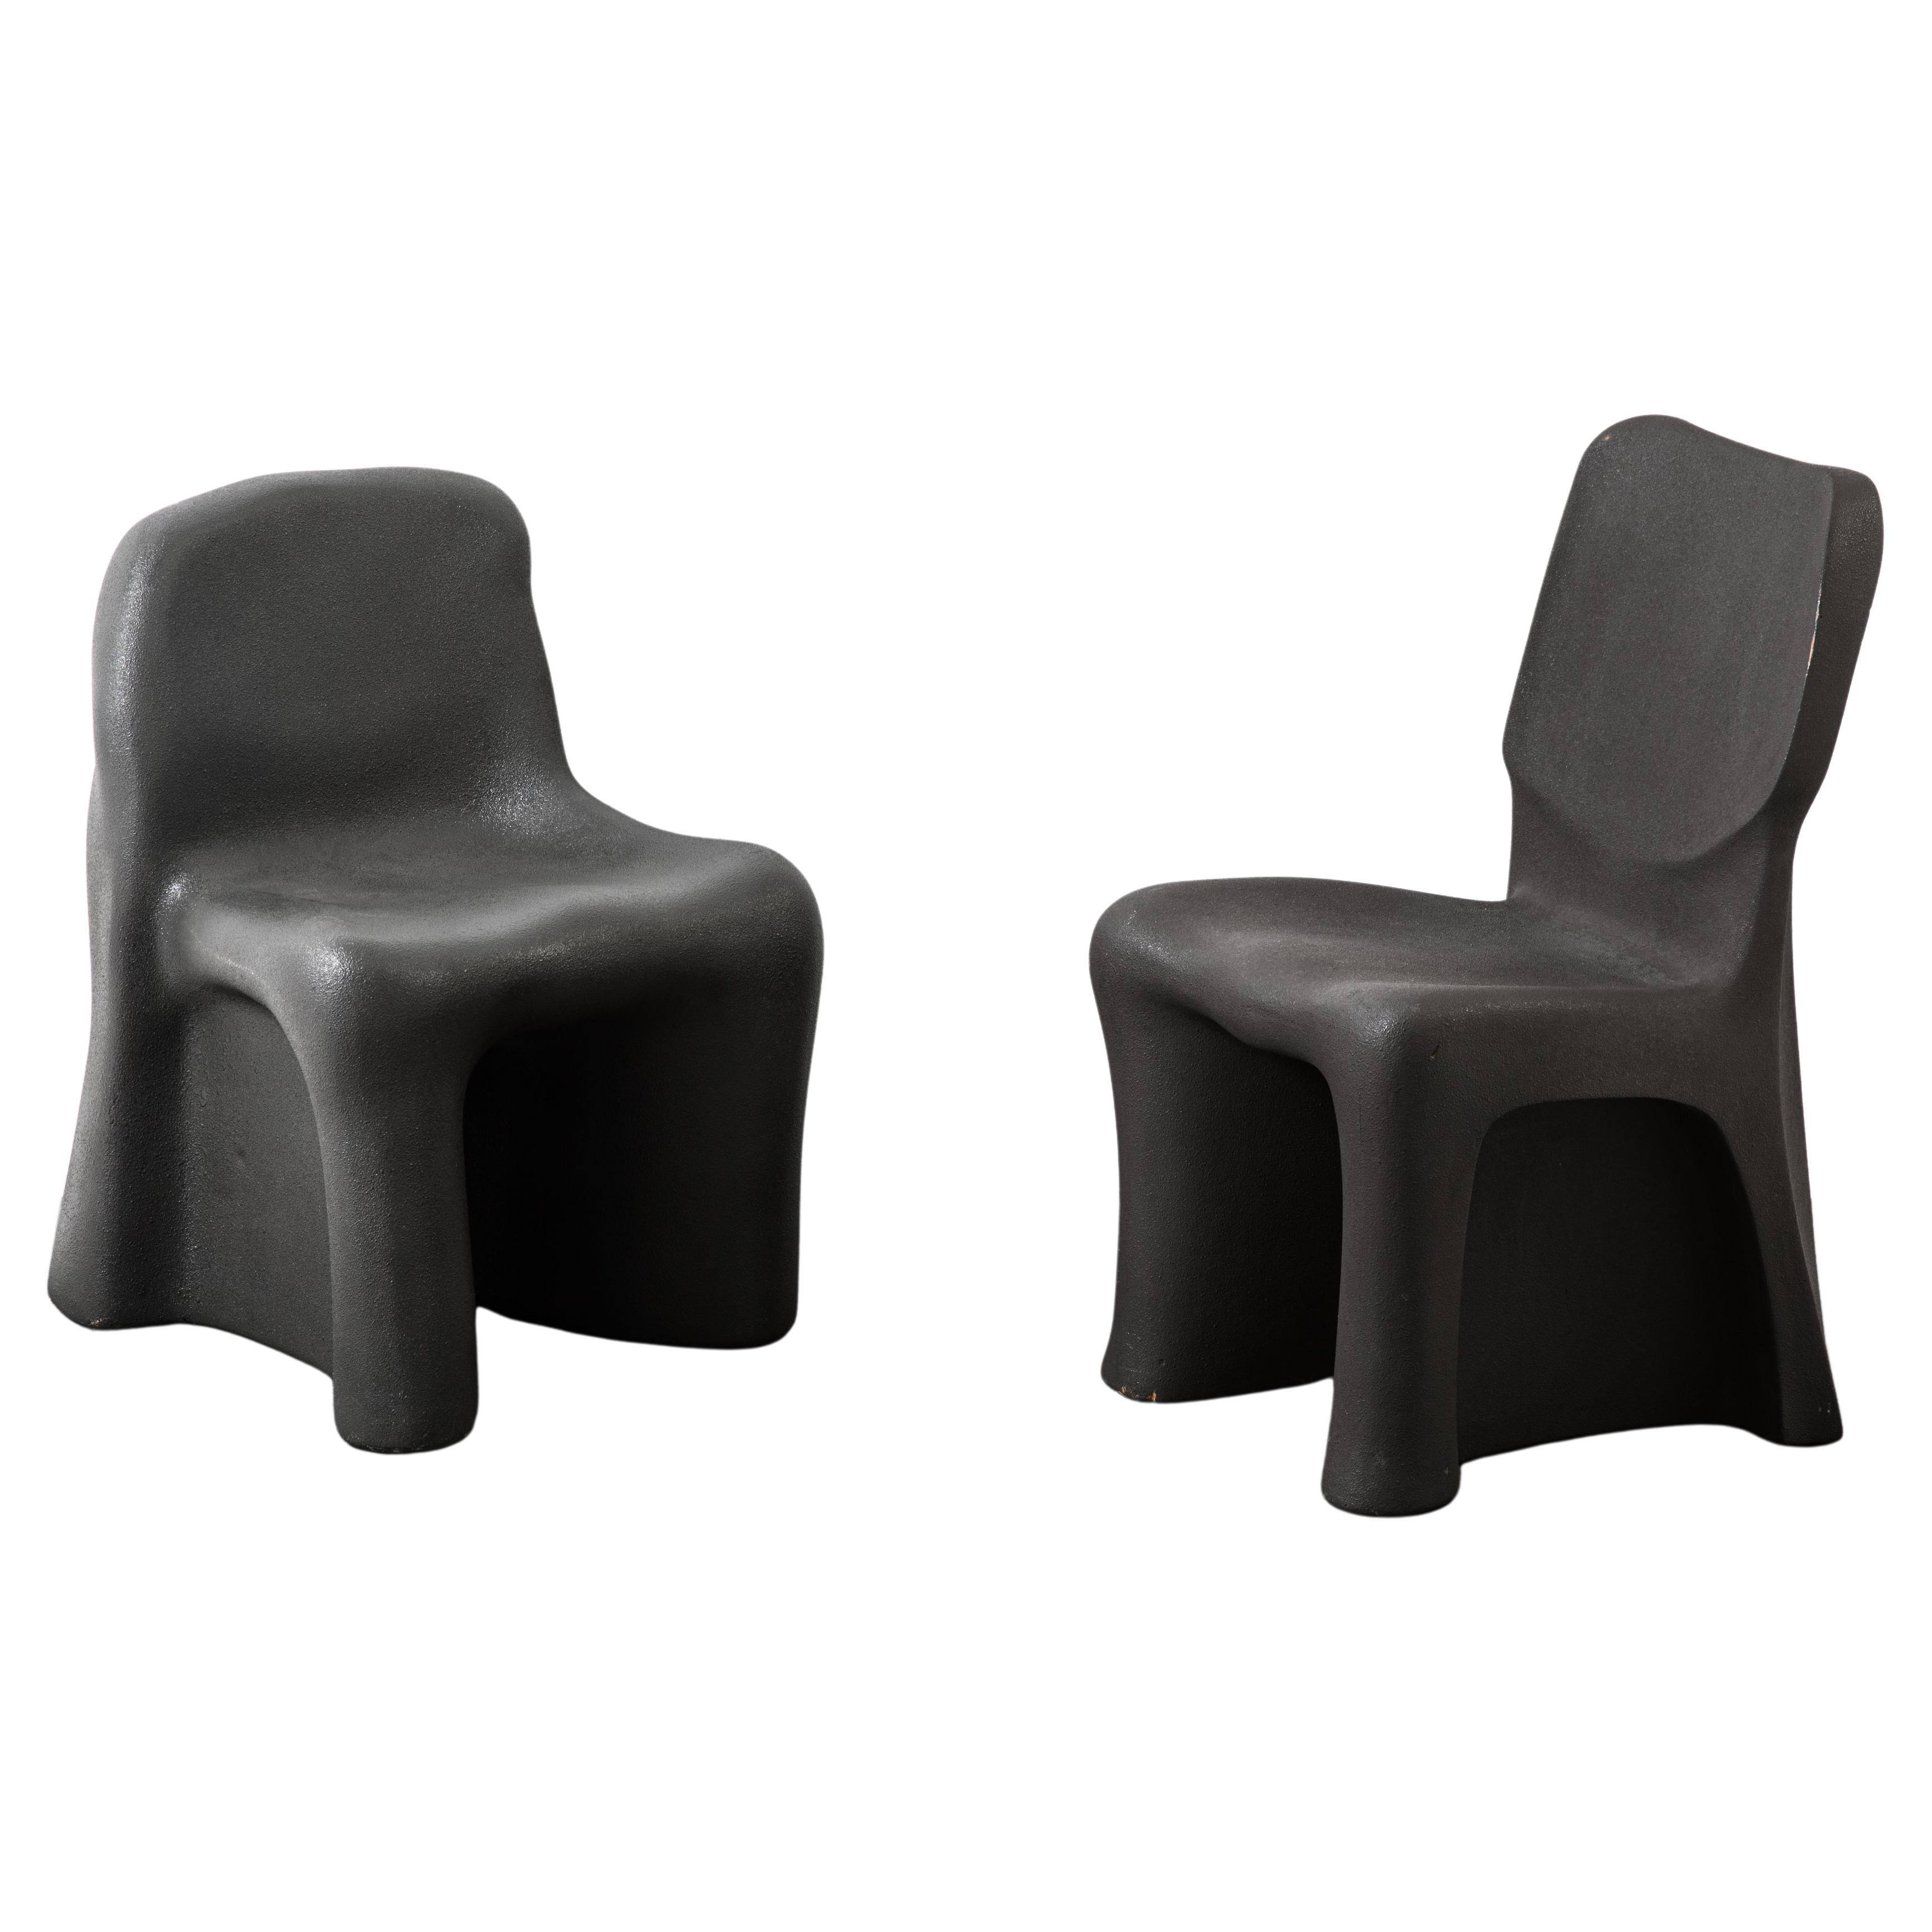 1980s Dalila Due pair of chairs by Gaetano Pesce For Sale